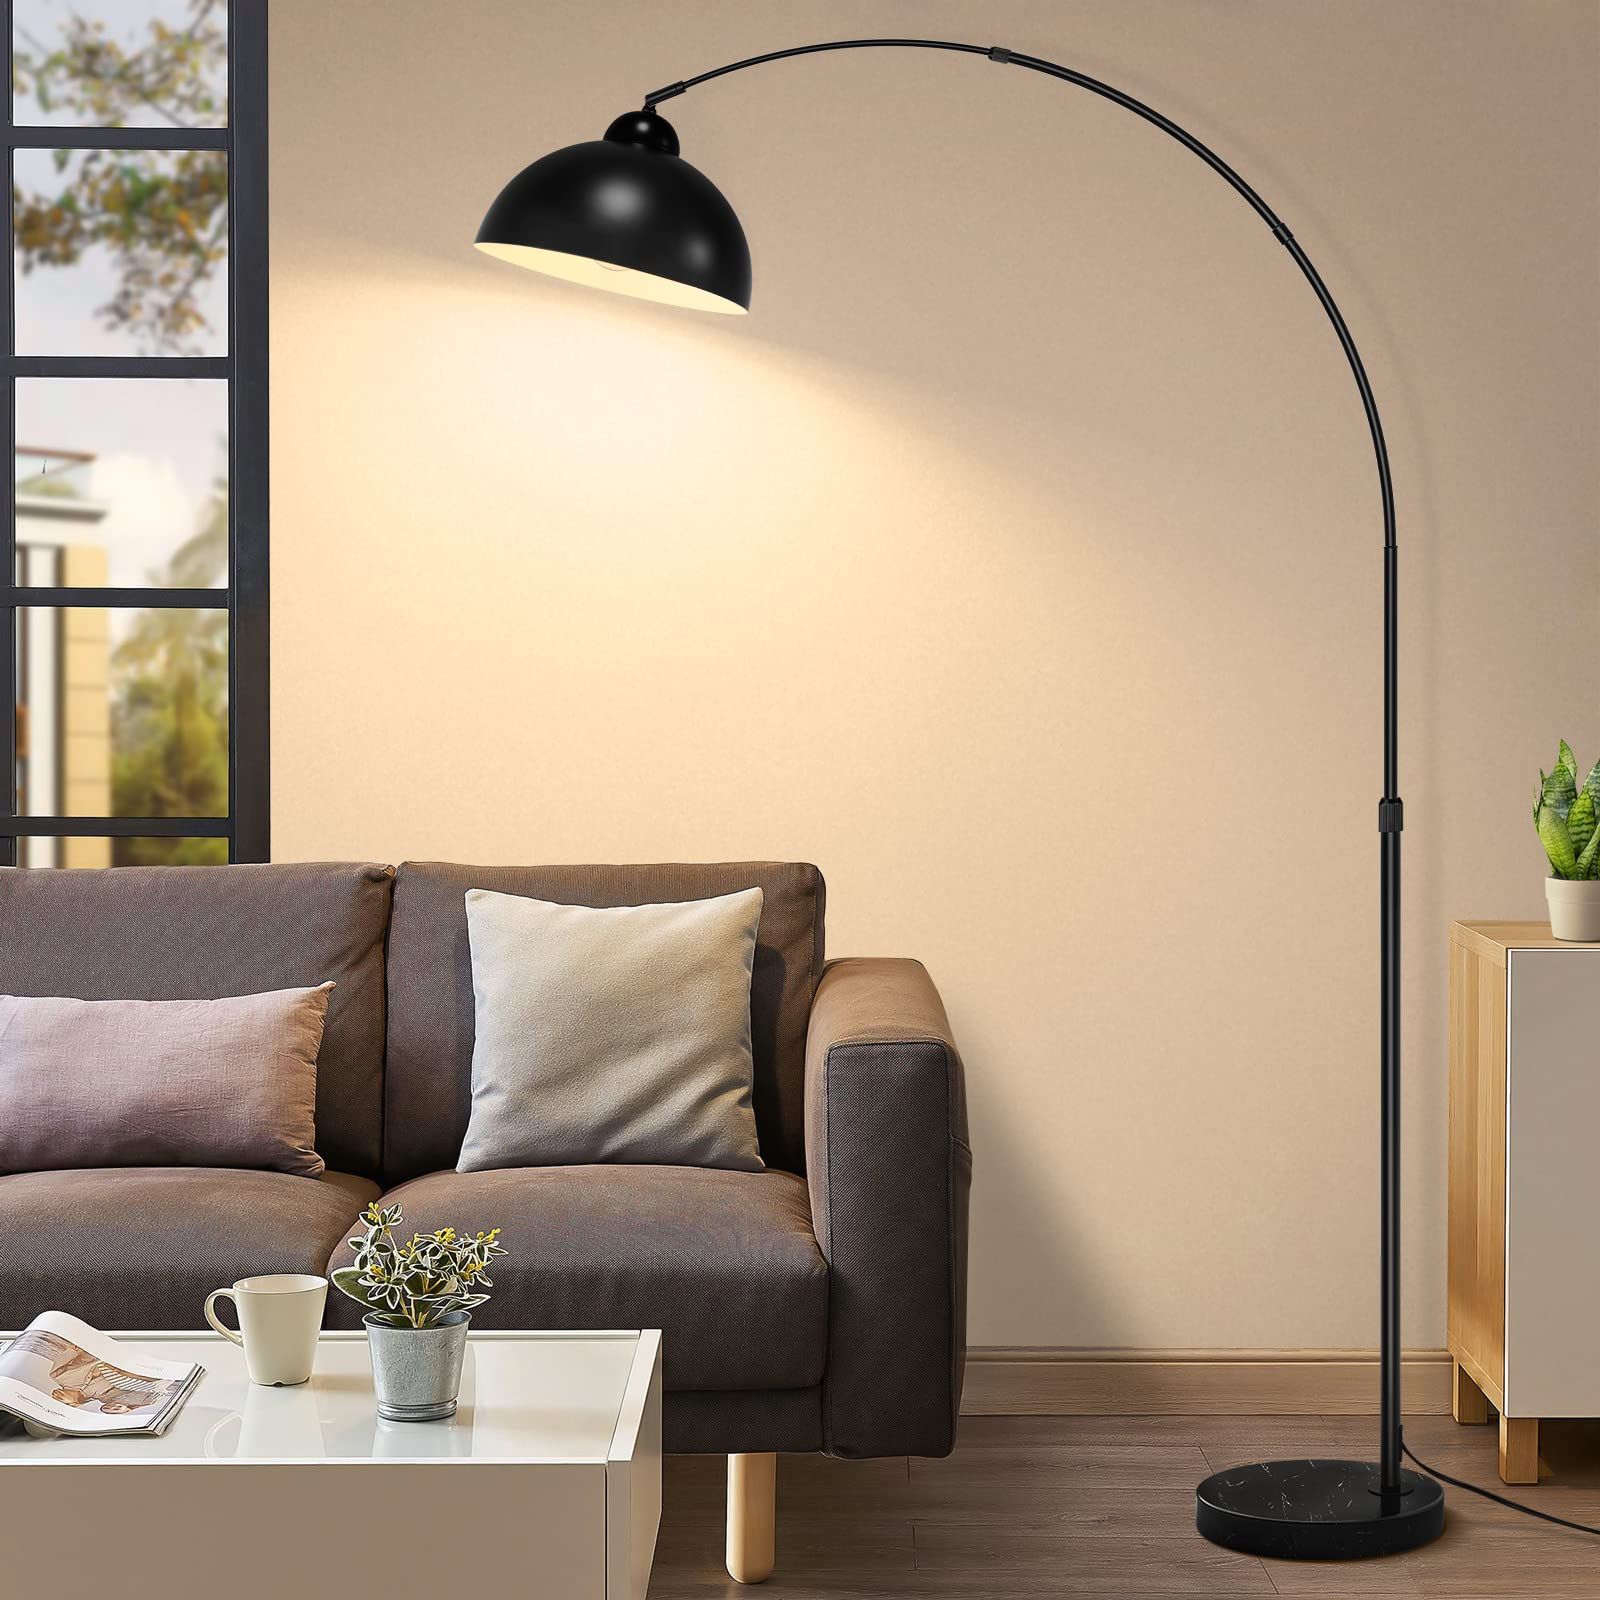 Arc Standing Lamps Regarding Widely Used Modern 73" Arc Floor Lamp With Metal Hanging Dome Shade, Industrial  Adjustable Over The Couch Stand Up Light, Marble Base Farmhouse Tall  Task/reading Standing Lamp For Living Room Bedroom Office Black – – (View 2 of 10)